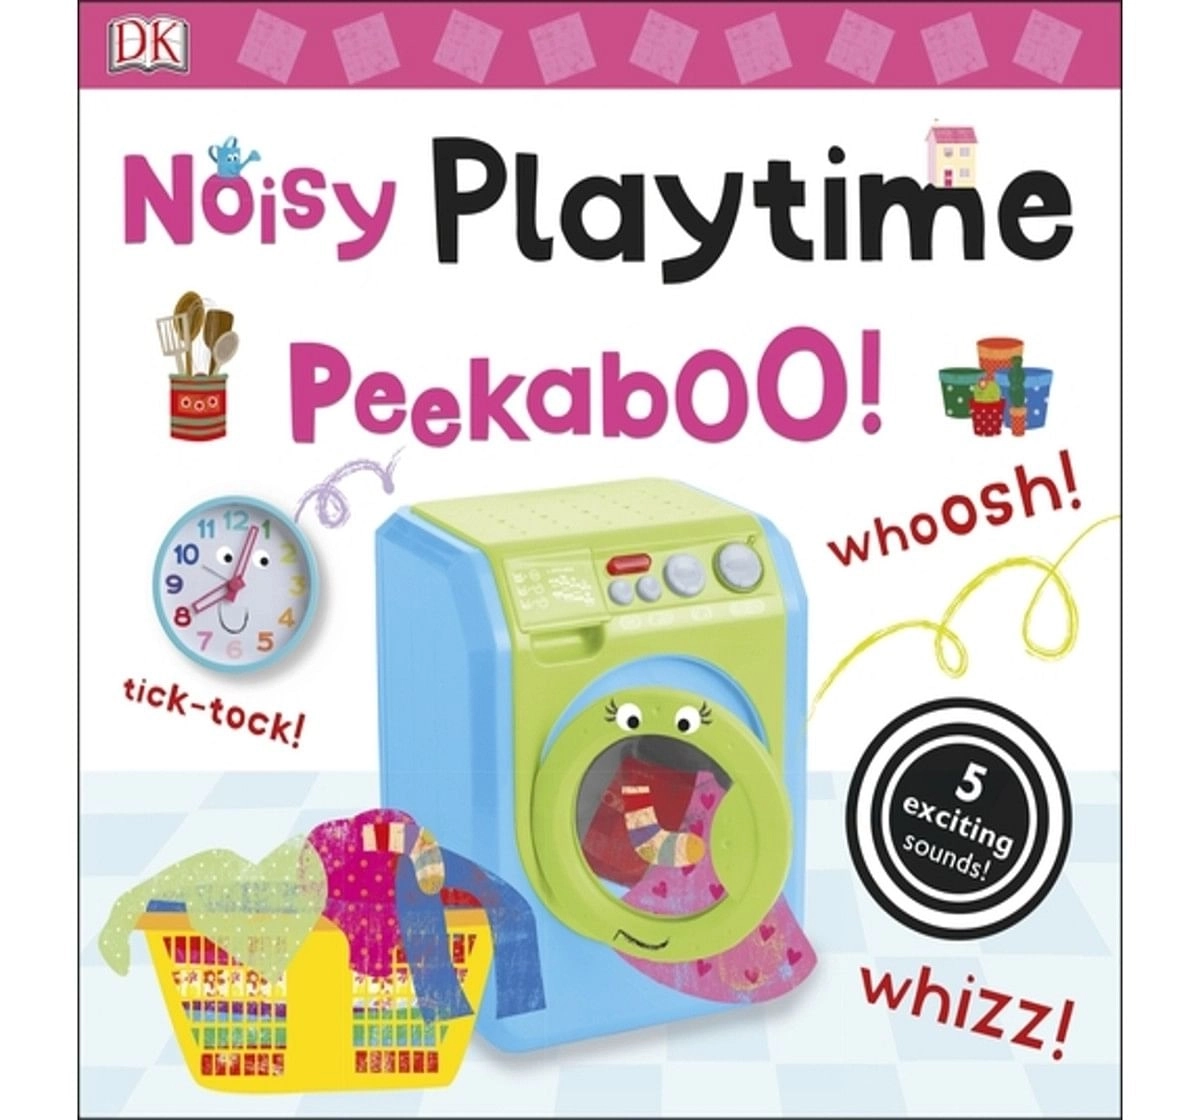 Noisy Playtime Peekaboo!, 280 Pages Book by DK Children, Paperback